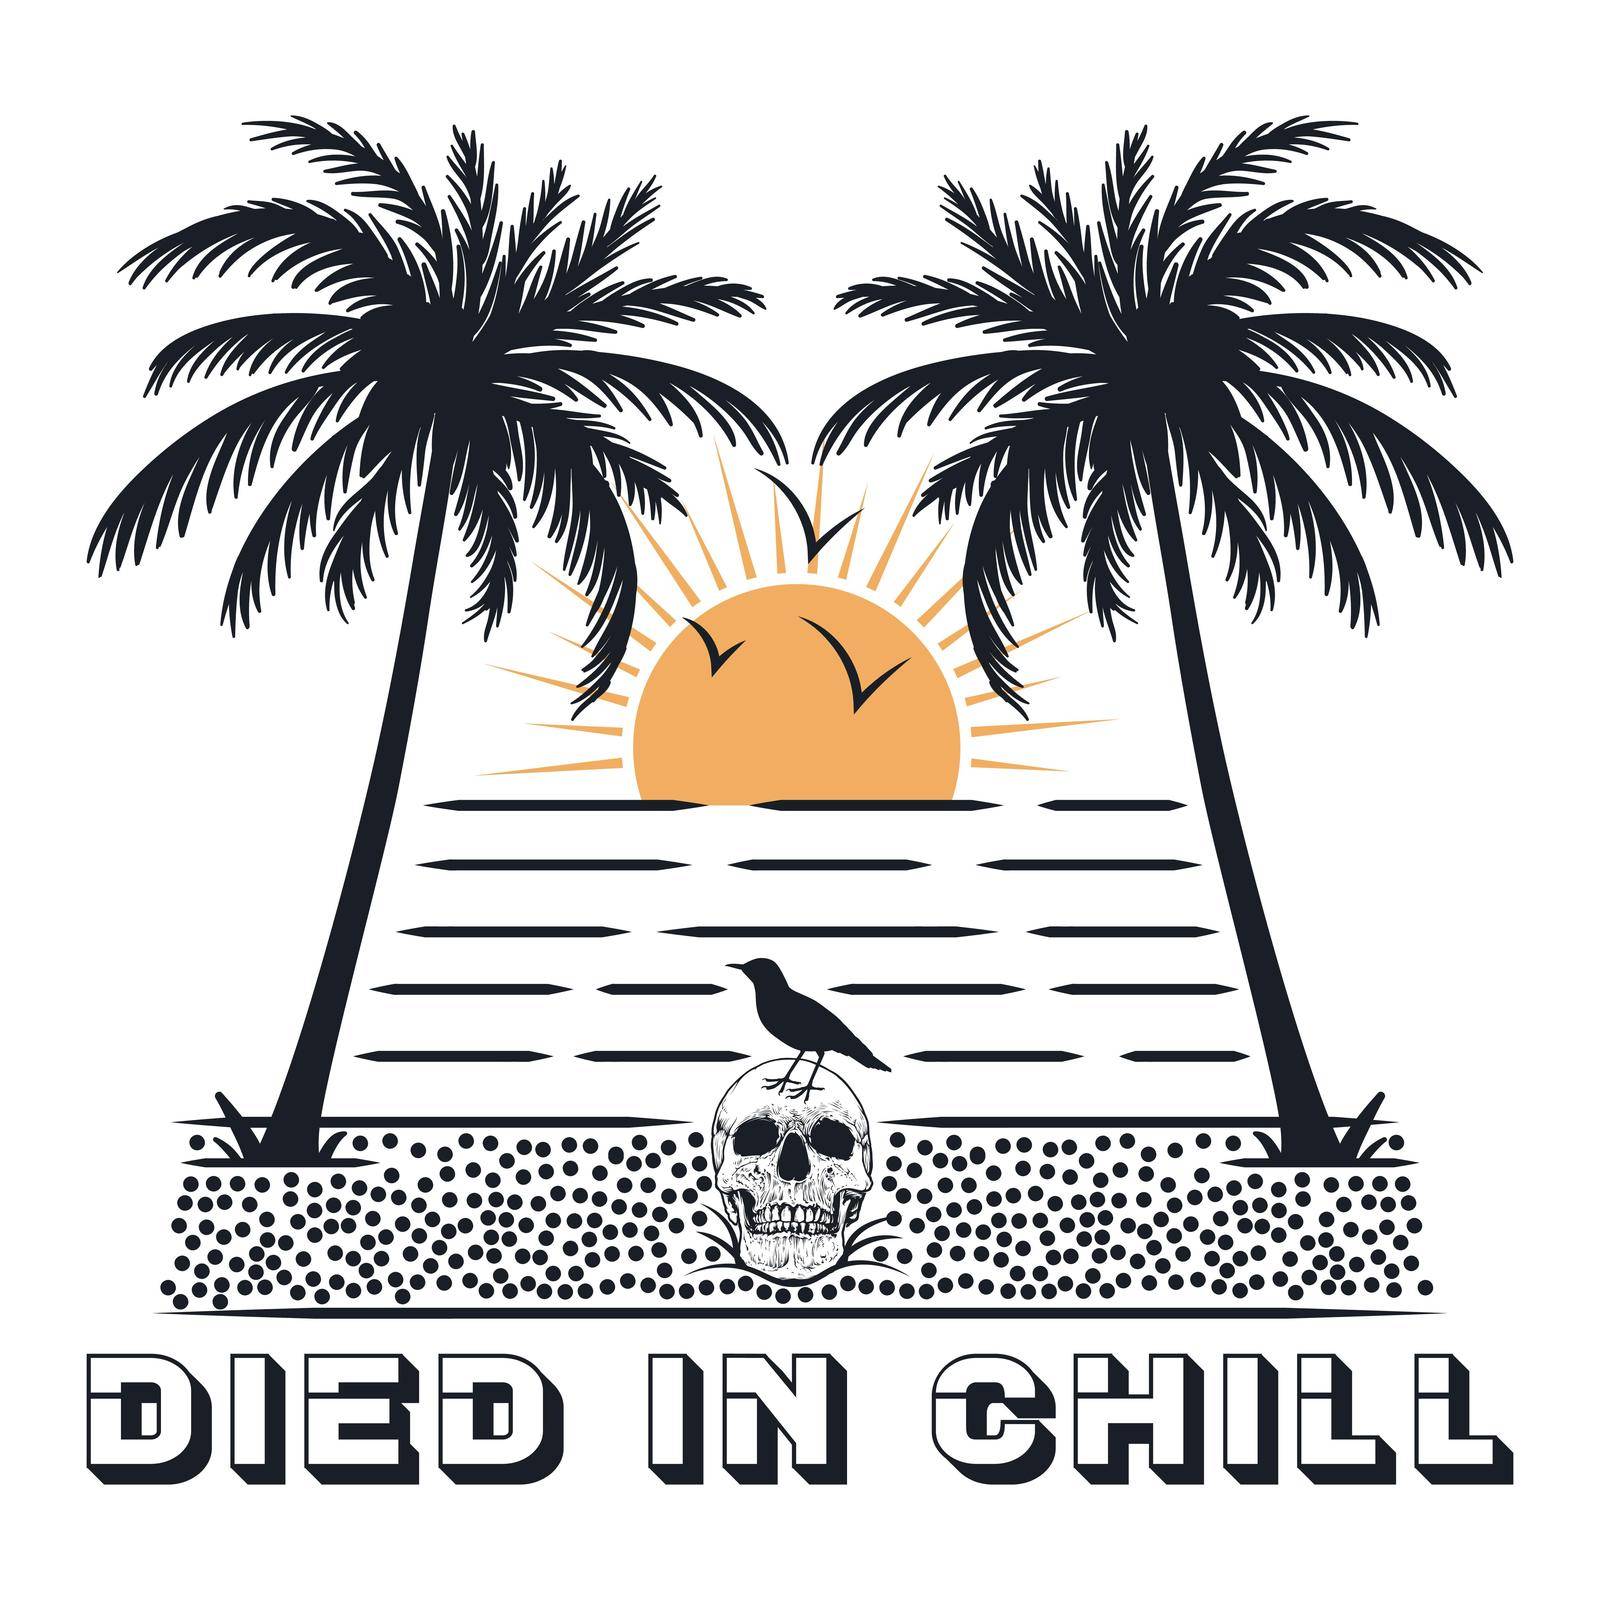 Died in chill on the beach.  Editable, resizable, EPS 10, vector illustration.